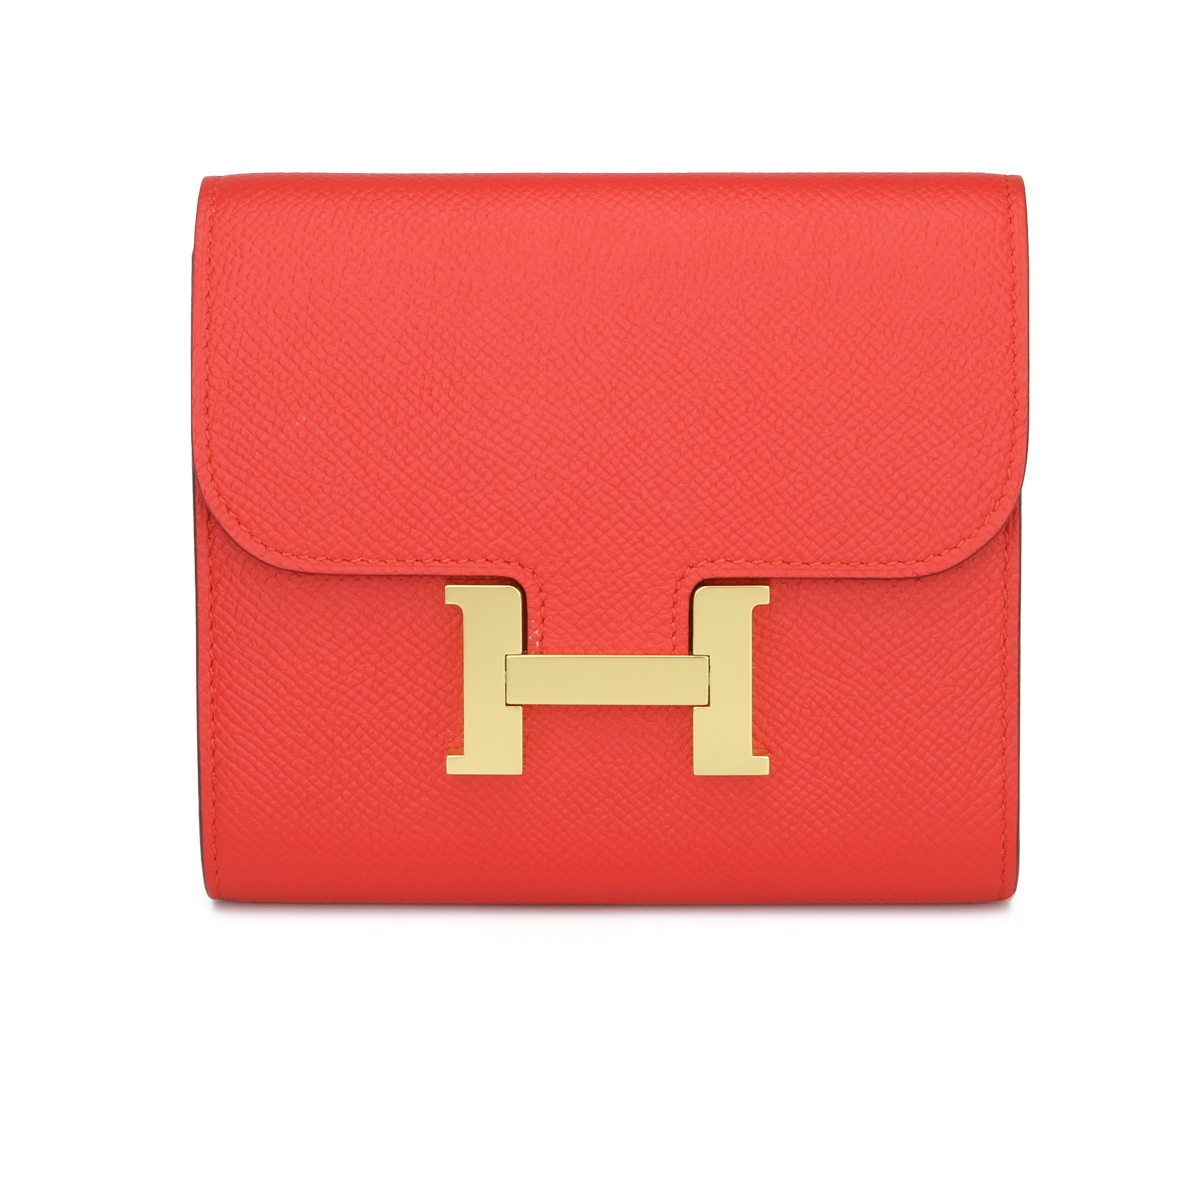 Hermès Constance Compact Wallet Rouge Tomate Epsom with Gold Hardware ...